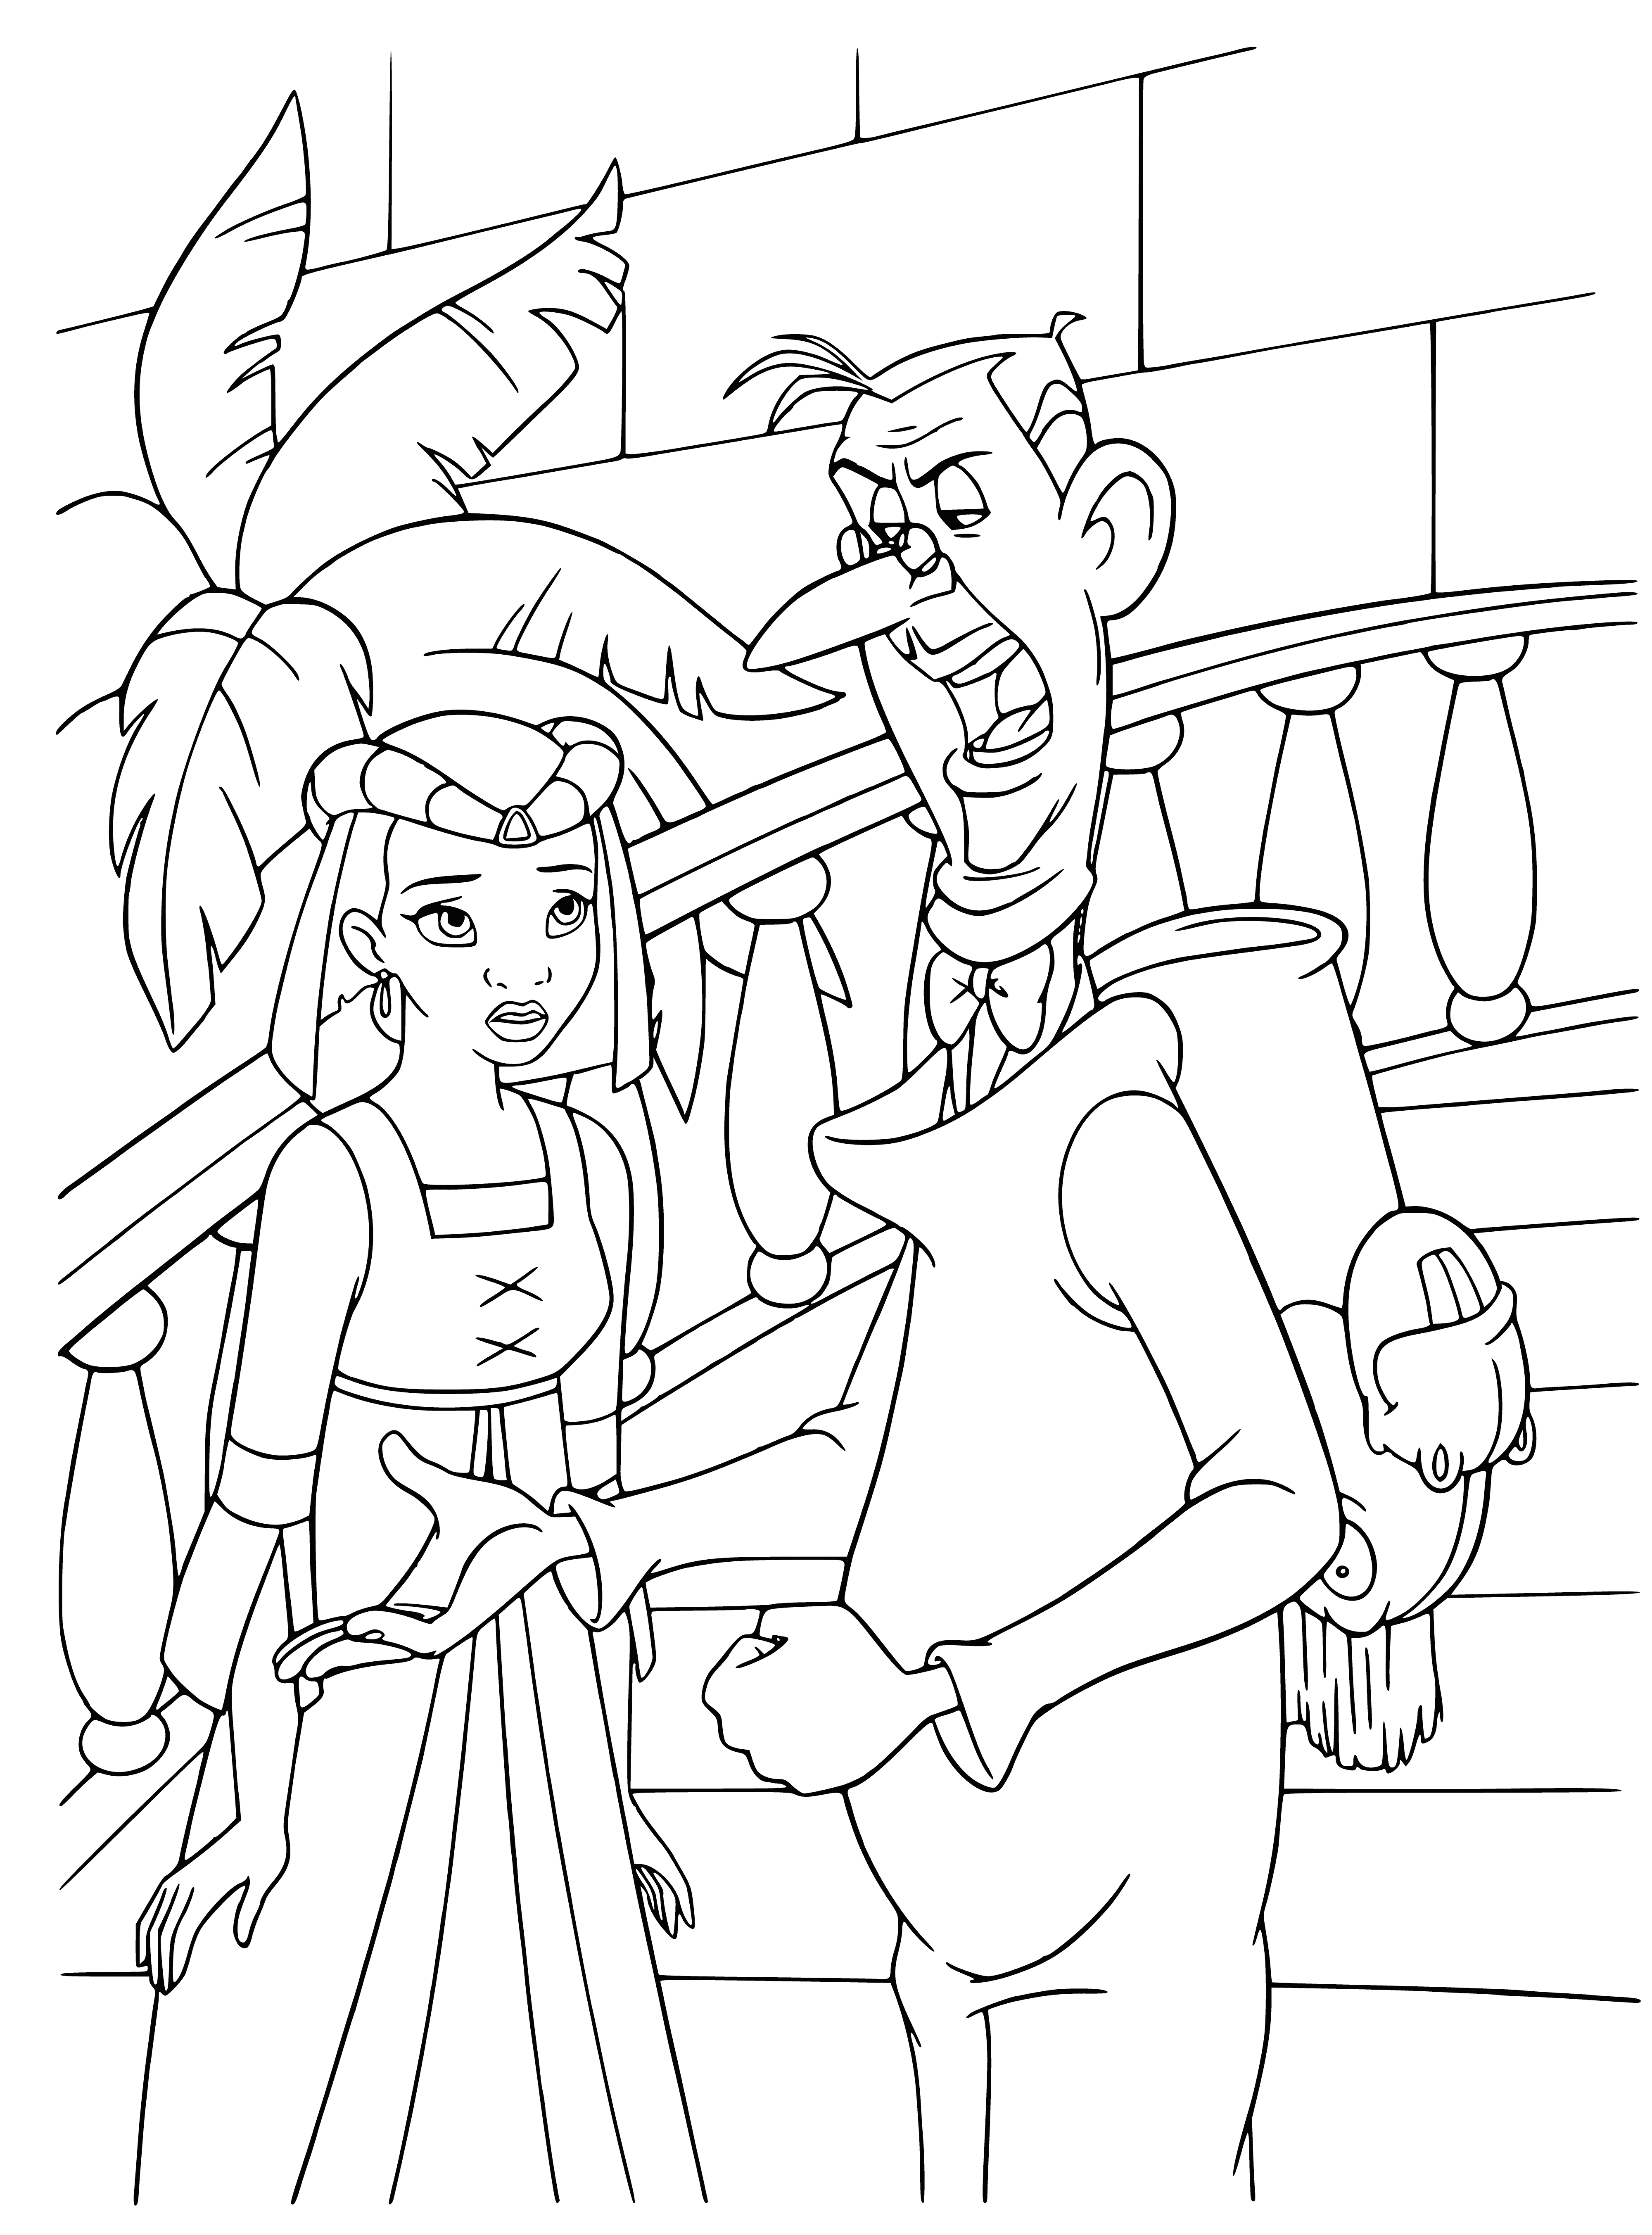 Tiana and the creditor coloring page